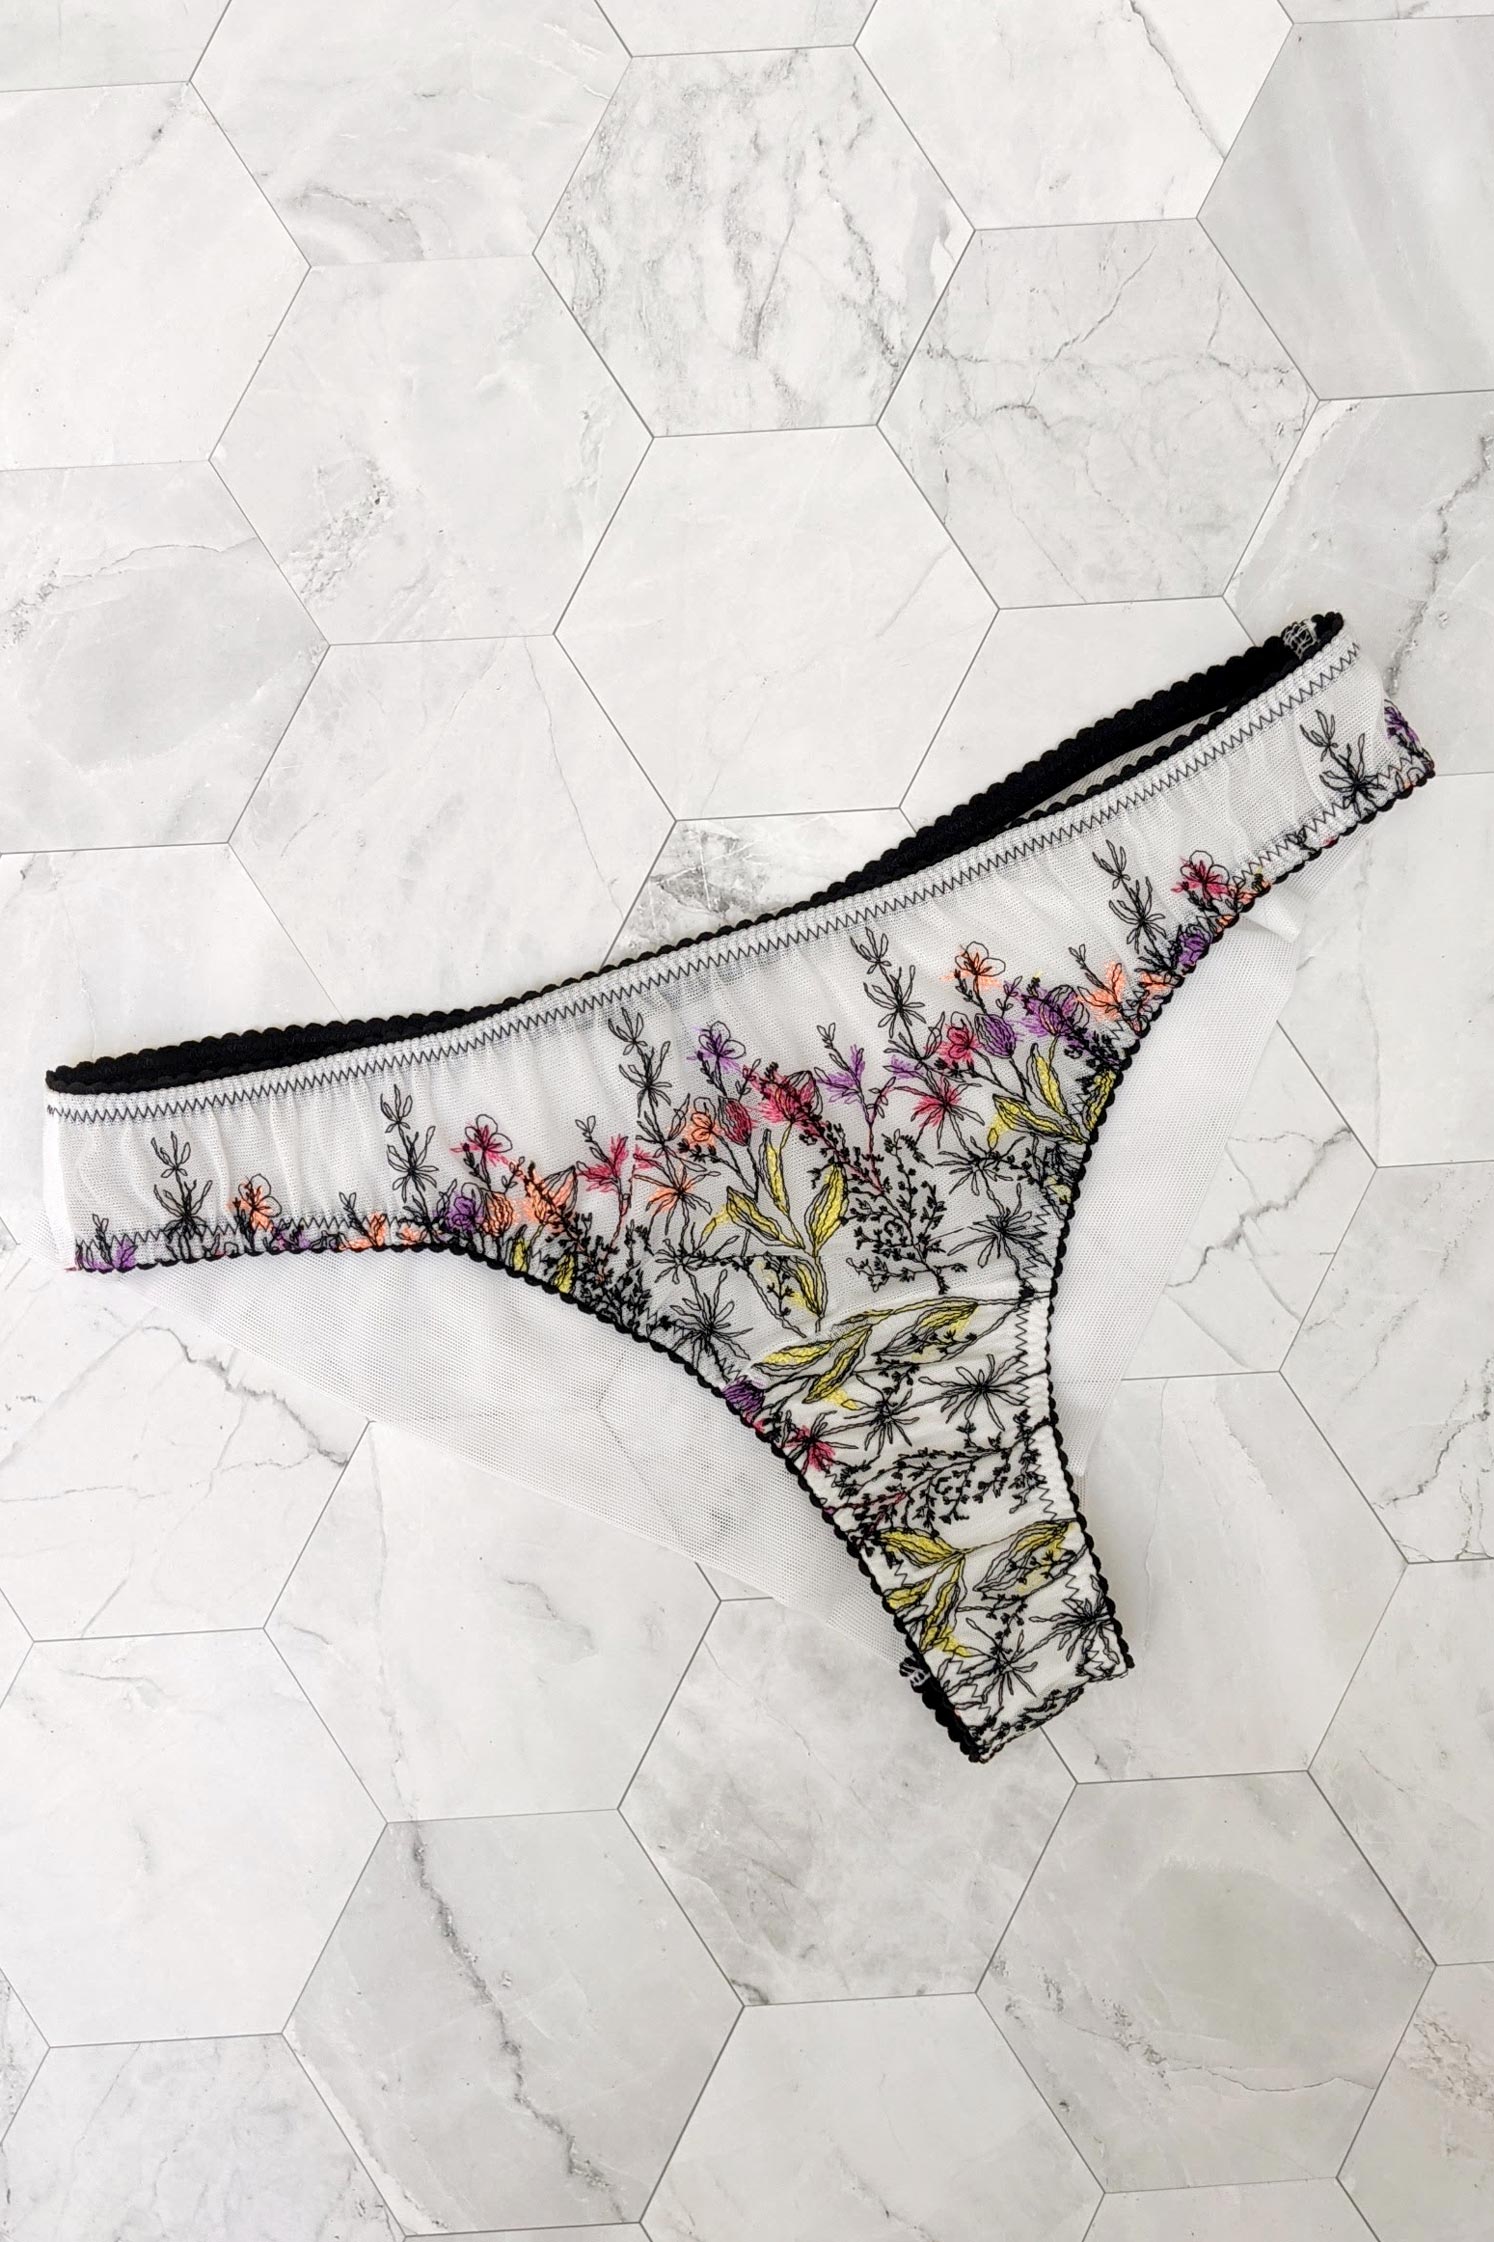 Luxury designer knickers with colorful floral embroidery